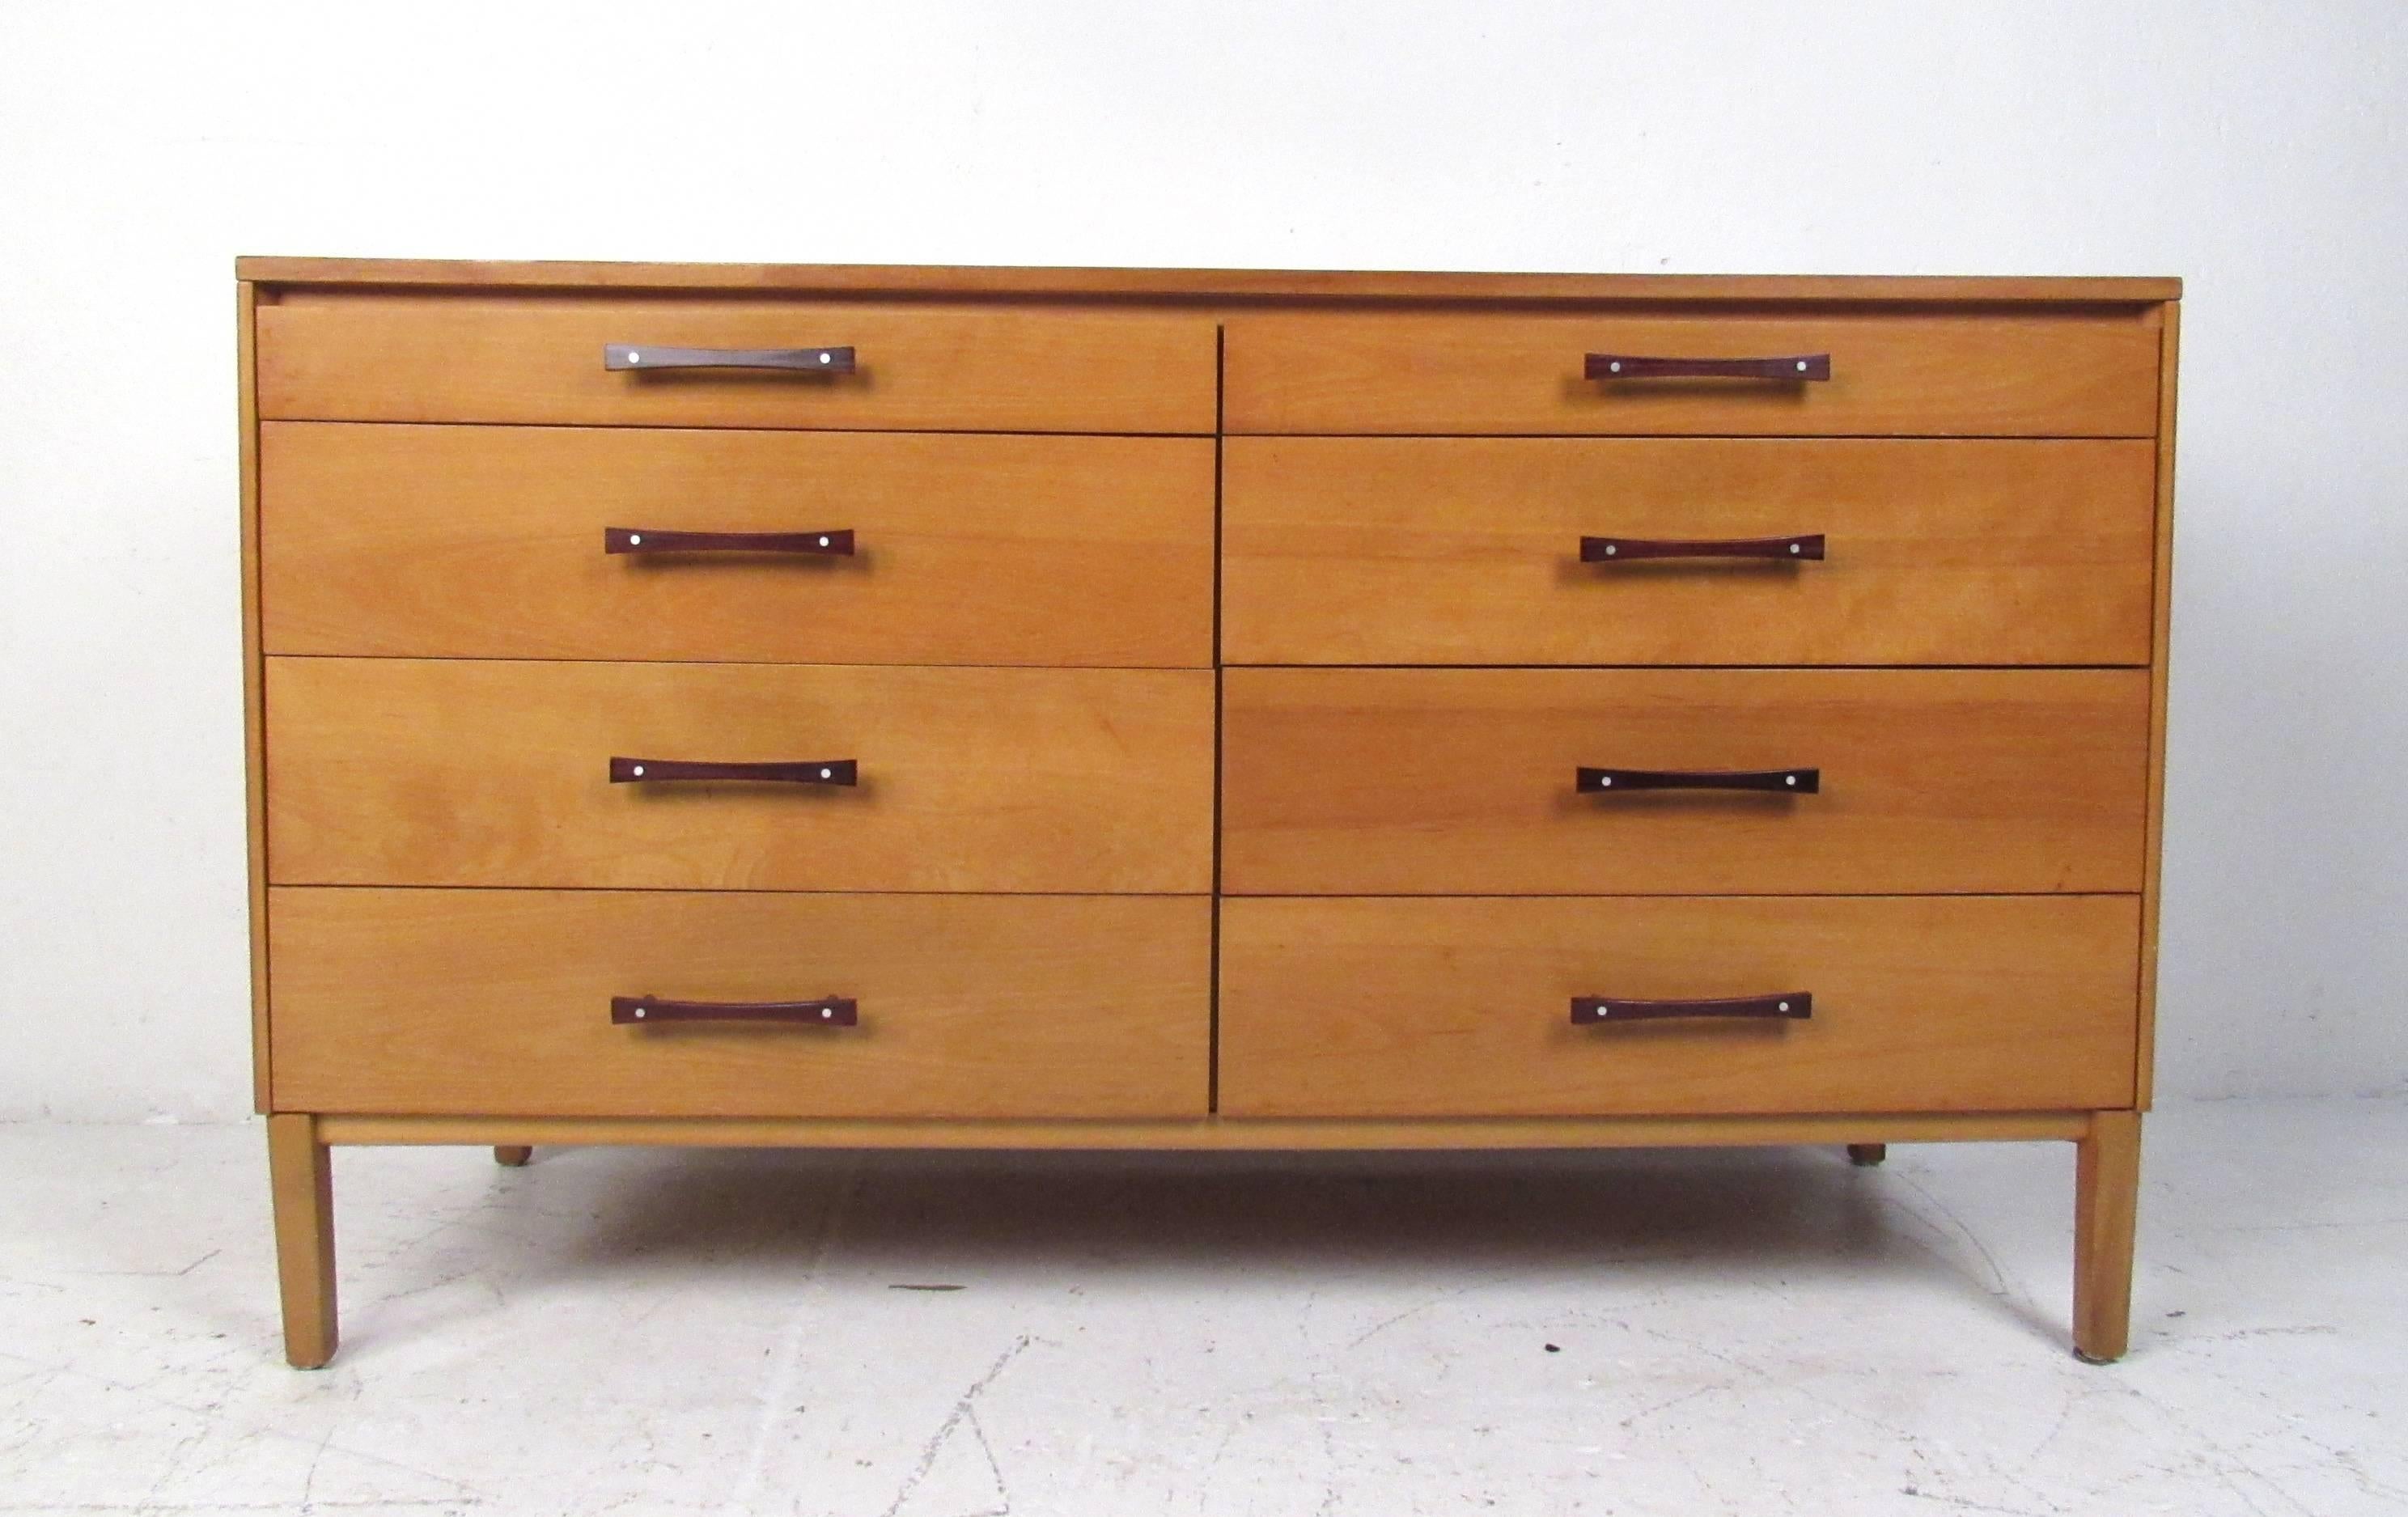 This beautiful Mid-Century Modern dresser features eight drawers with sculpted bow-tie shaped pulls made of Brazilian rosewood. A straight line design with a stunning blonde maple case and graduated drawers. This Paul McCobb, Perimeter group case